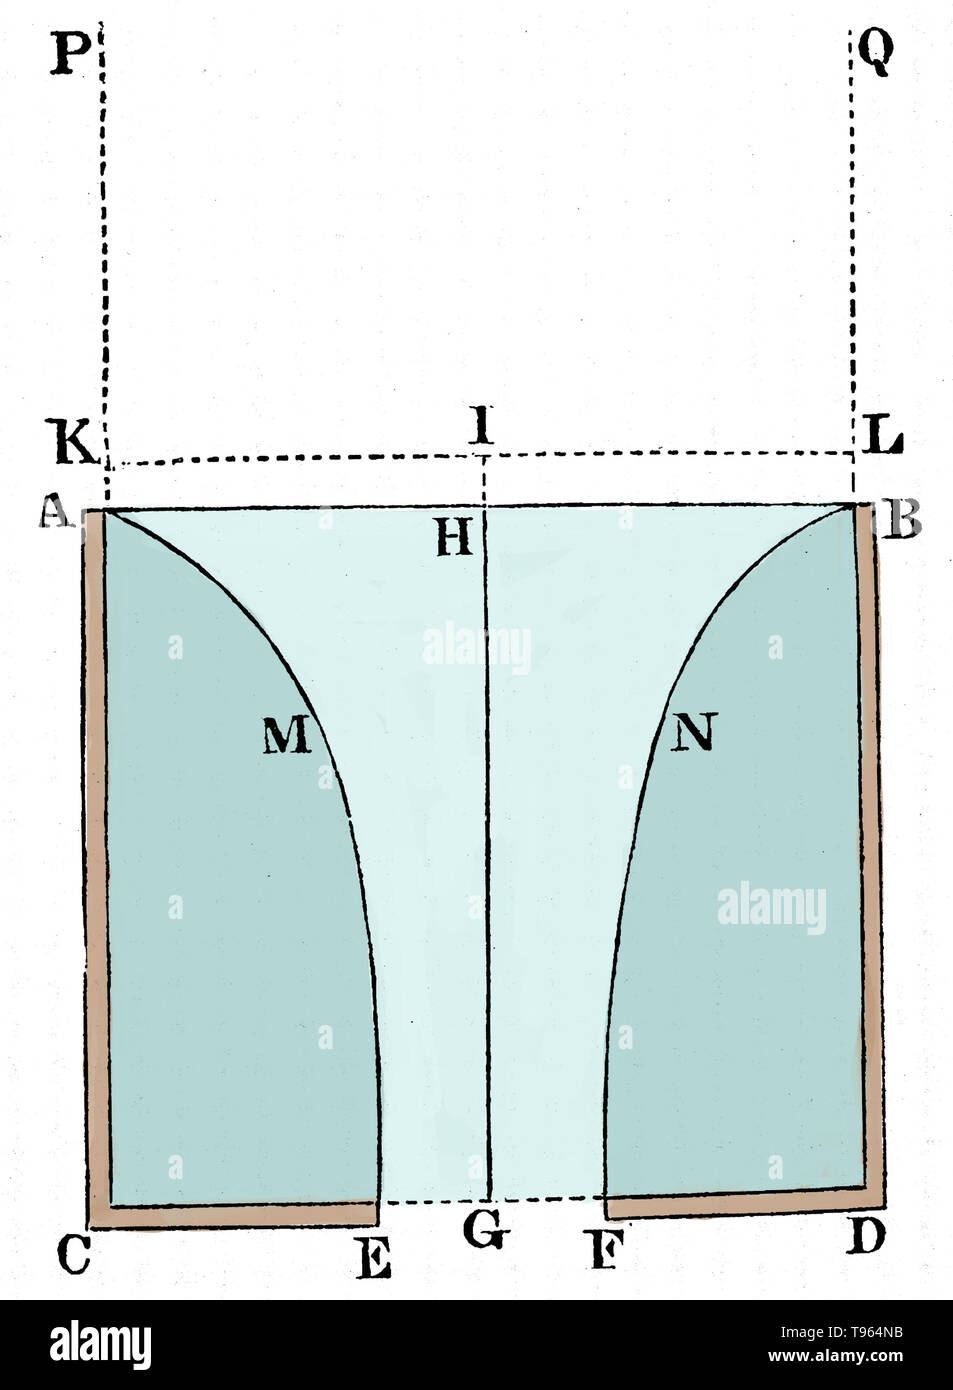 A diagram to define the motion of water running out of a cylindrical vessel through a hole made at the bottom. From The Principia: Mathematical Principles of Natural Philosophy by Isaac Newton. Newton (1642-1727) was an English physicist, mathematician, astronomer, natural philosopher, alchemist, and theologian. His monograph Philosophae Naturalis Principia Mathematica, published in 1687, lays the foundations for most of classical mechanics. In this work, Newton describes universal gravitation and the three laws of motion. Stock Photo